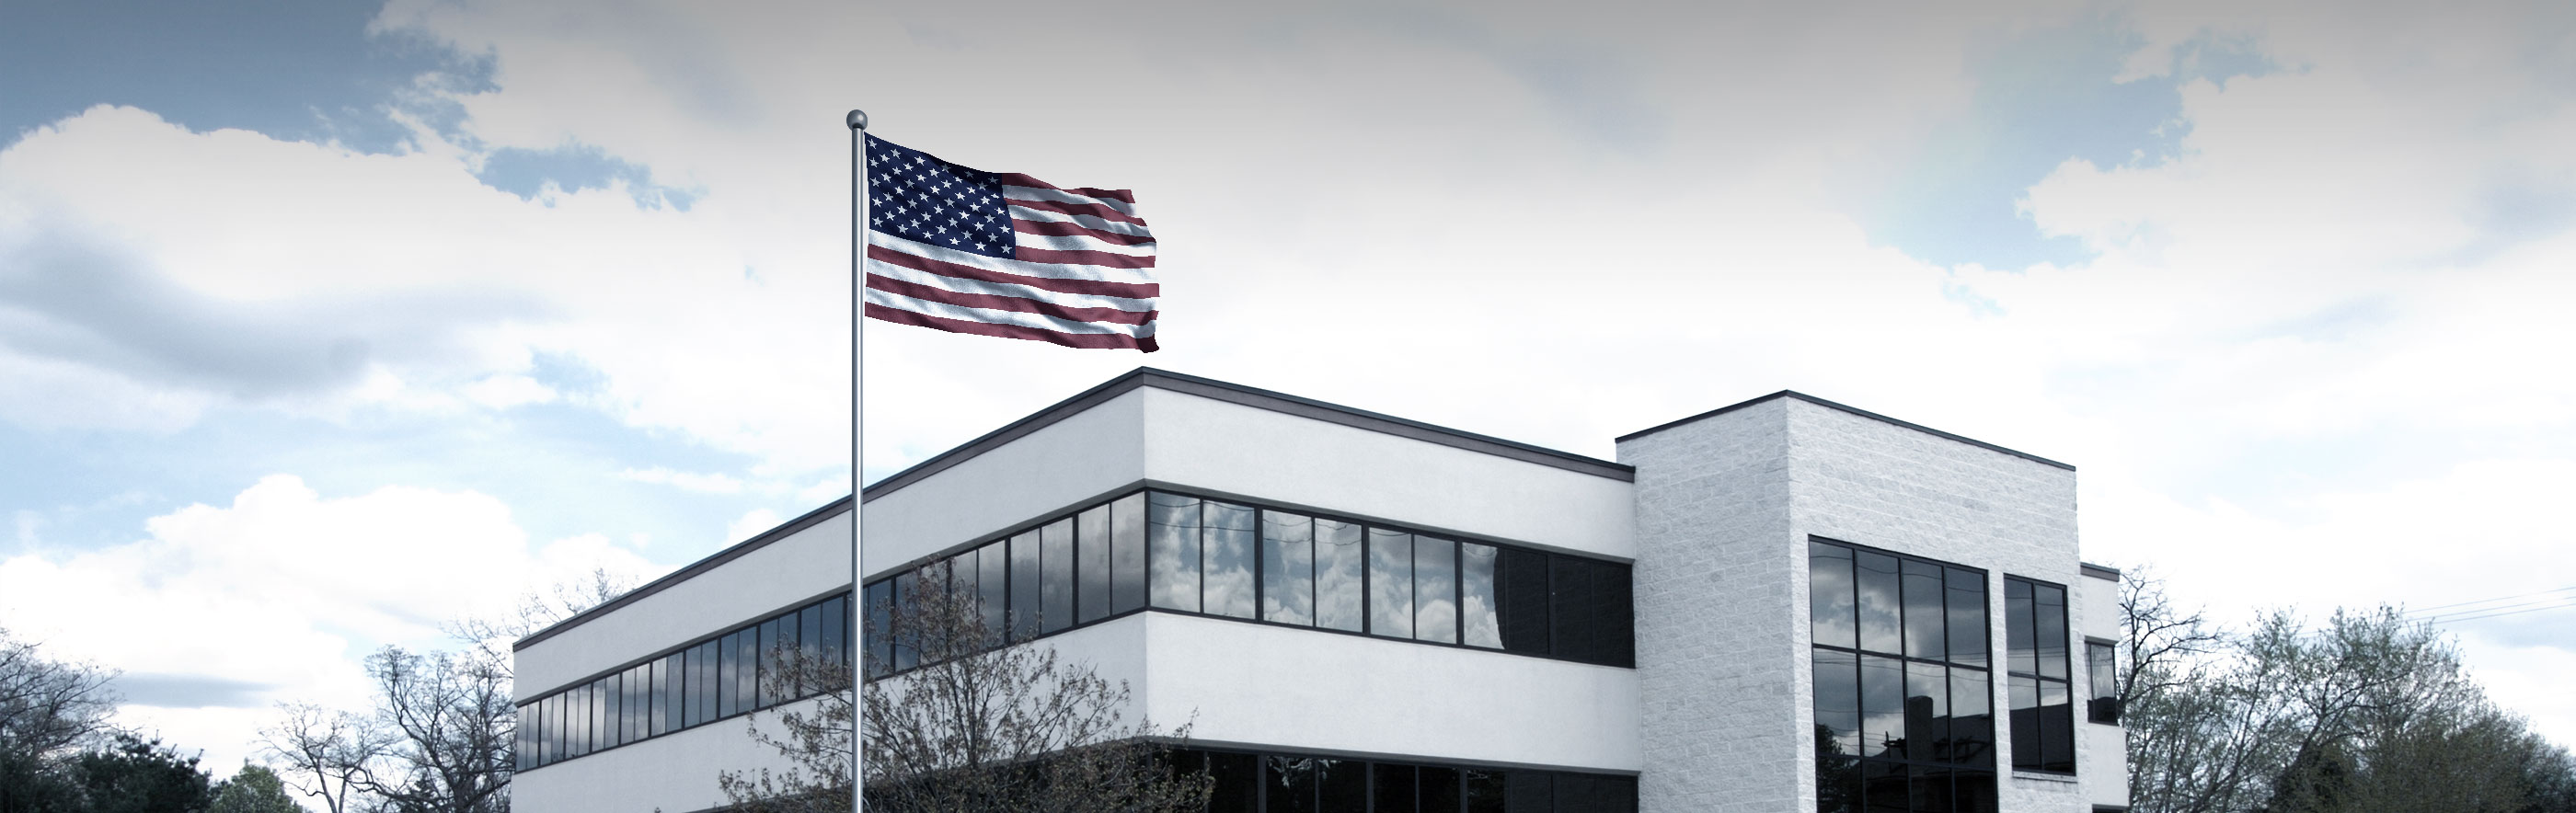 ProCon Roofing Corporation office with American flag flying outside office building